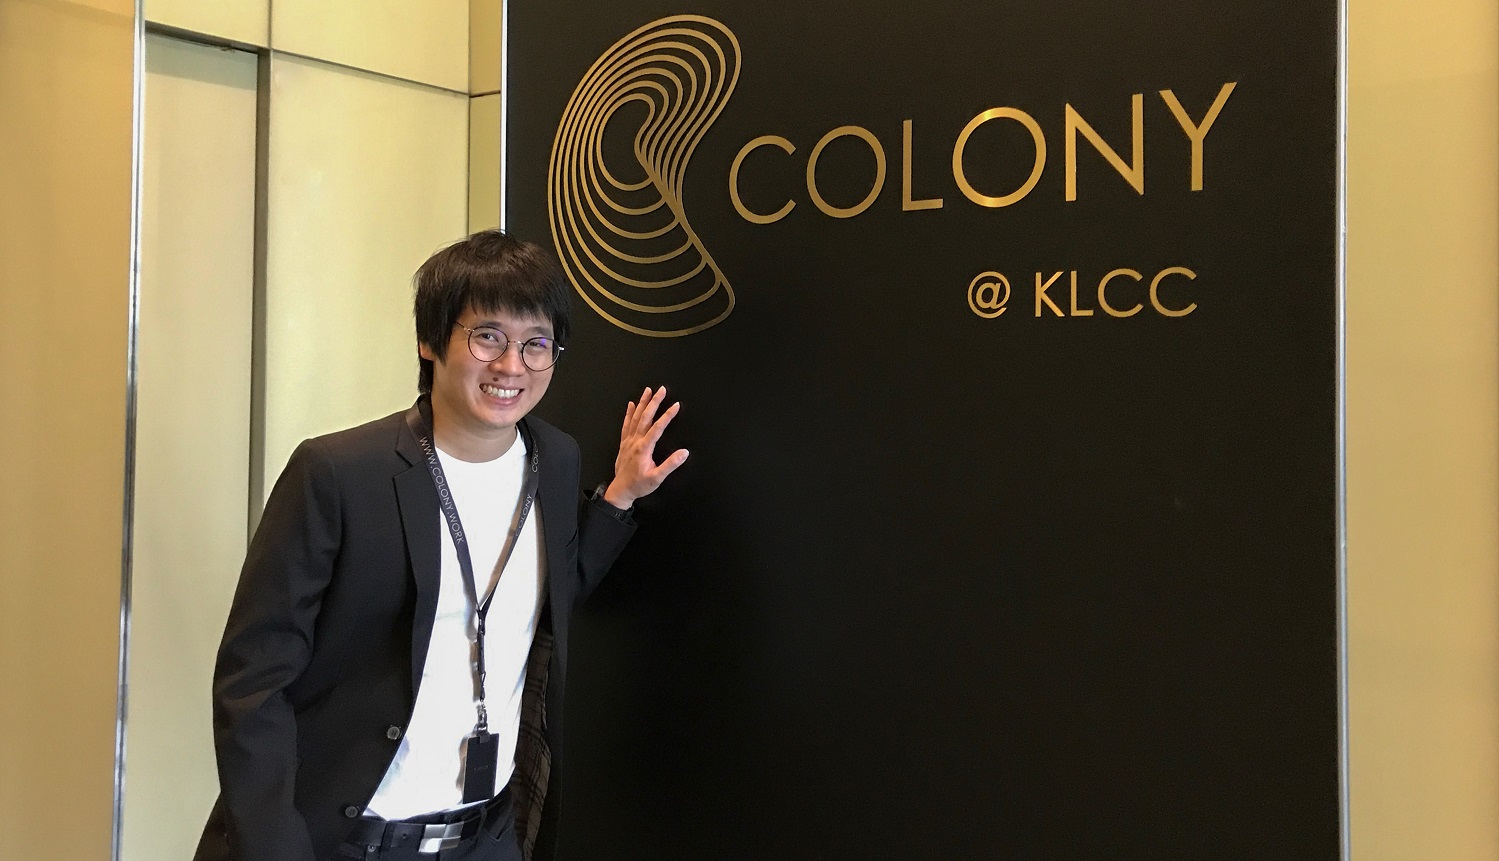 Colony’s serviced office space aims to increase employee wellbeing